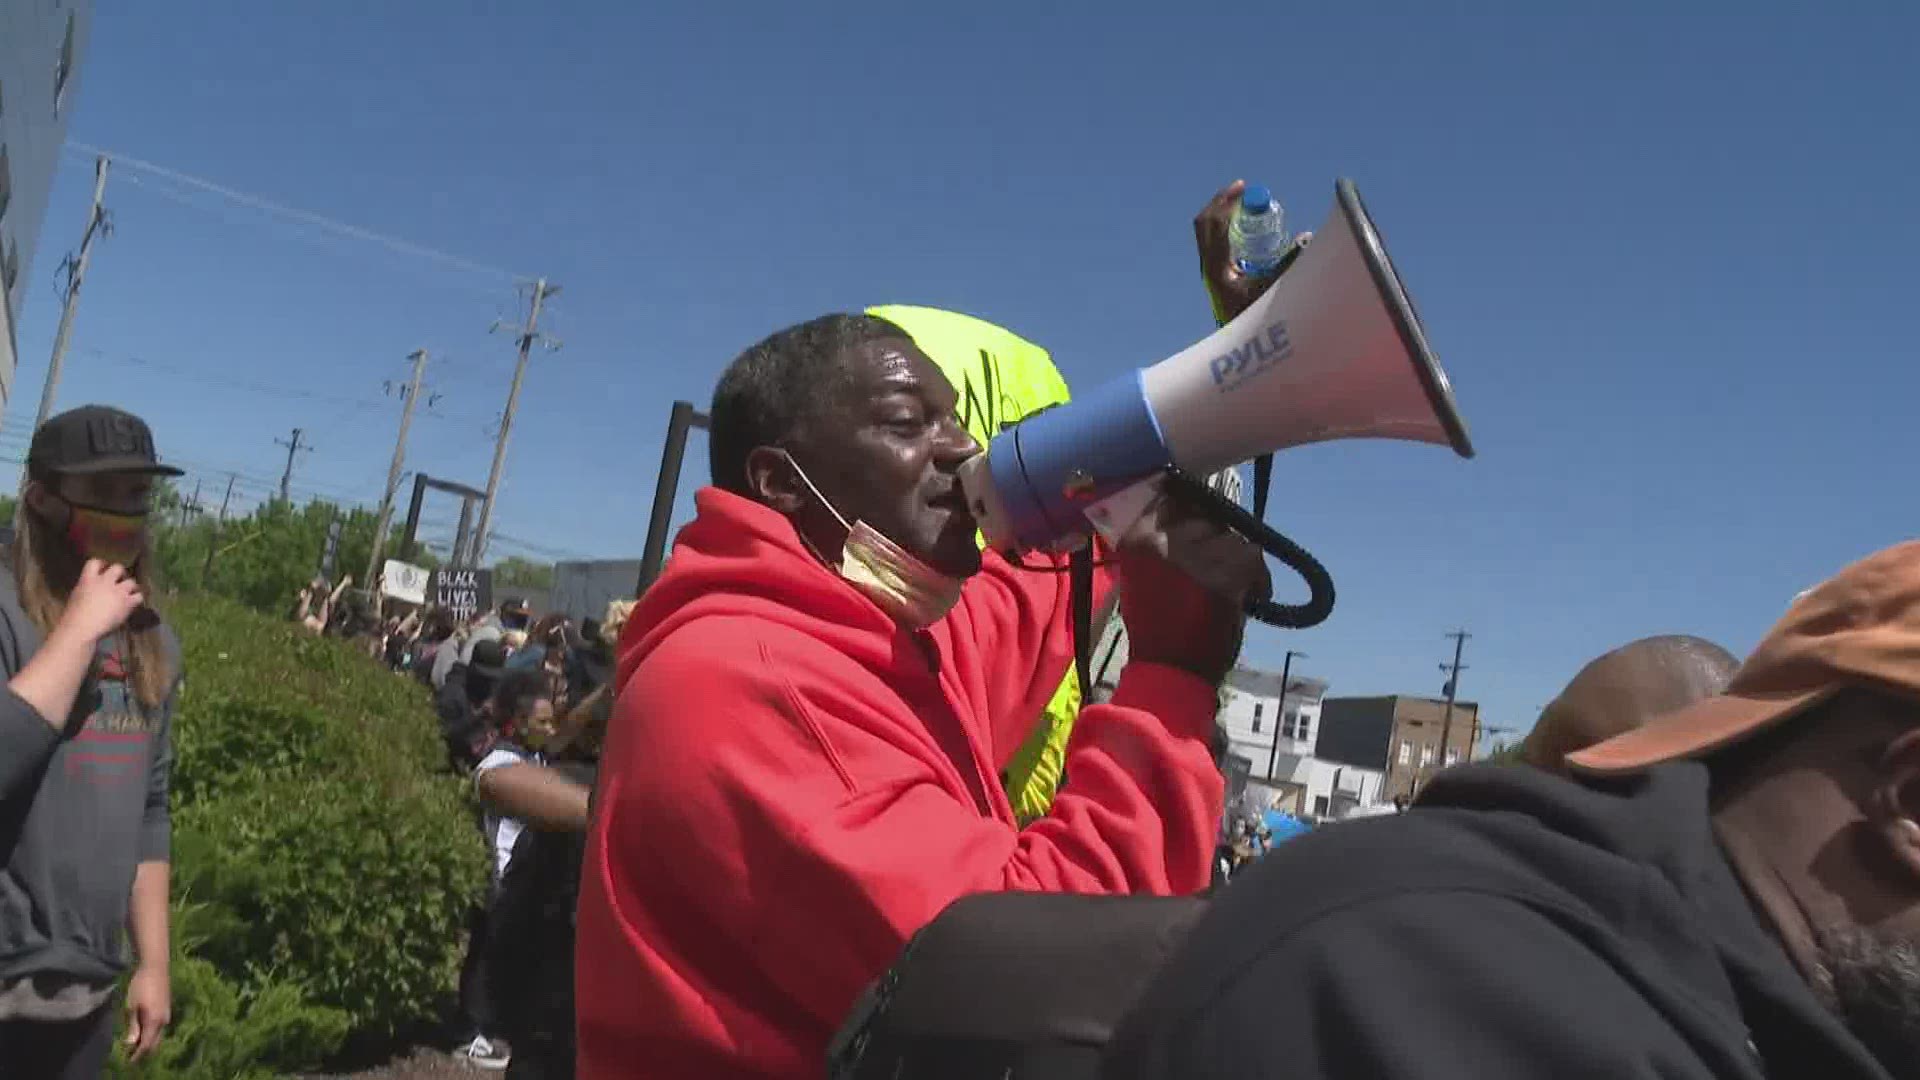 The Sunday afternoon rally held in the parking lot of the Muskegon County Hall of Justice building is being called a success by participants and police.